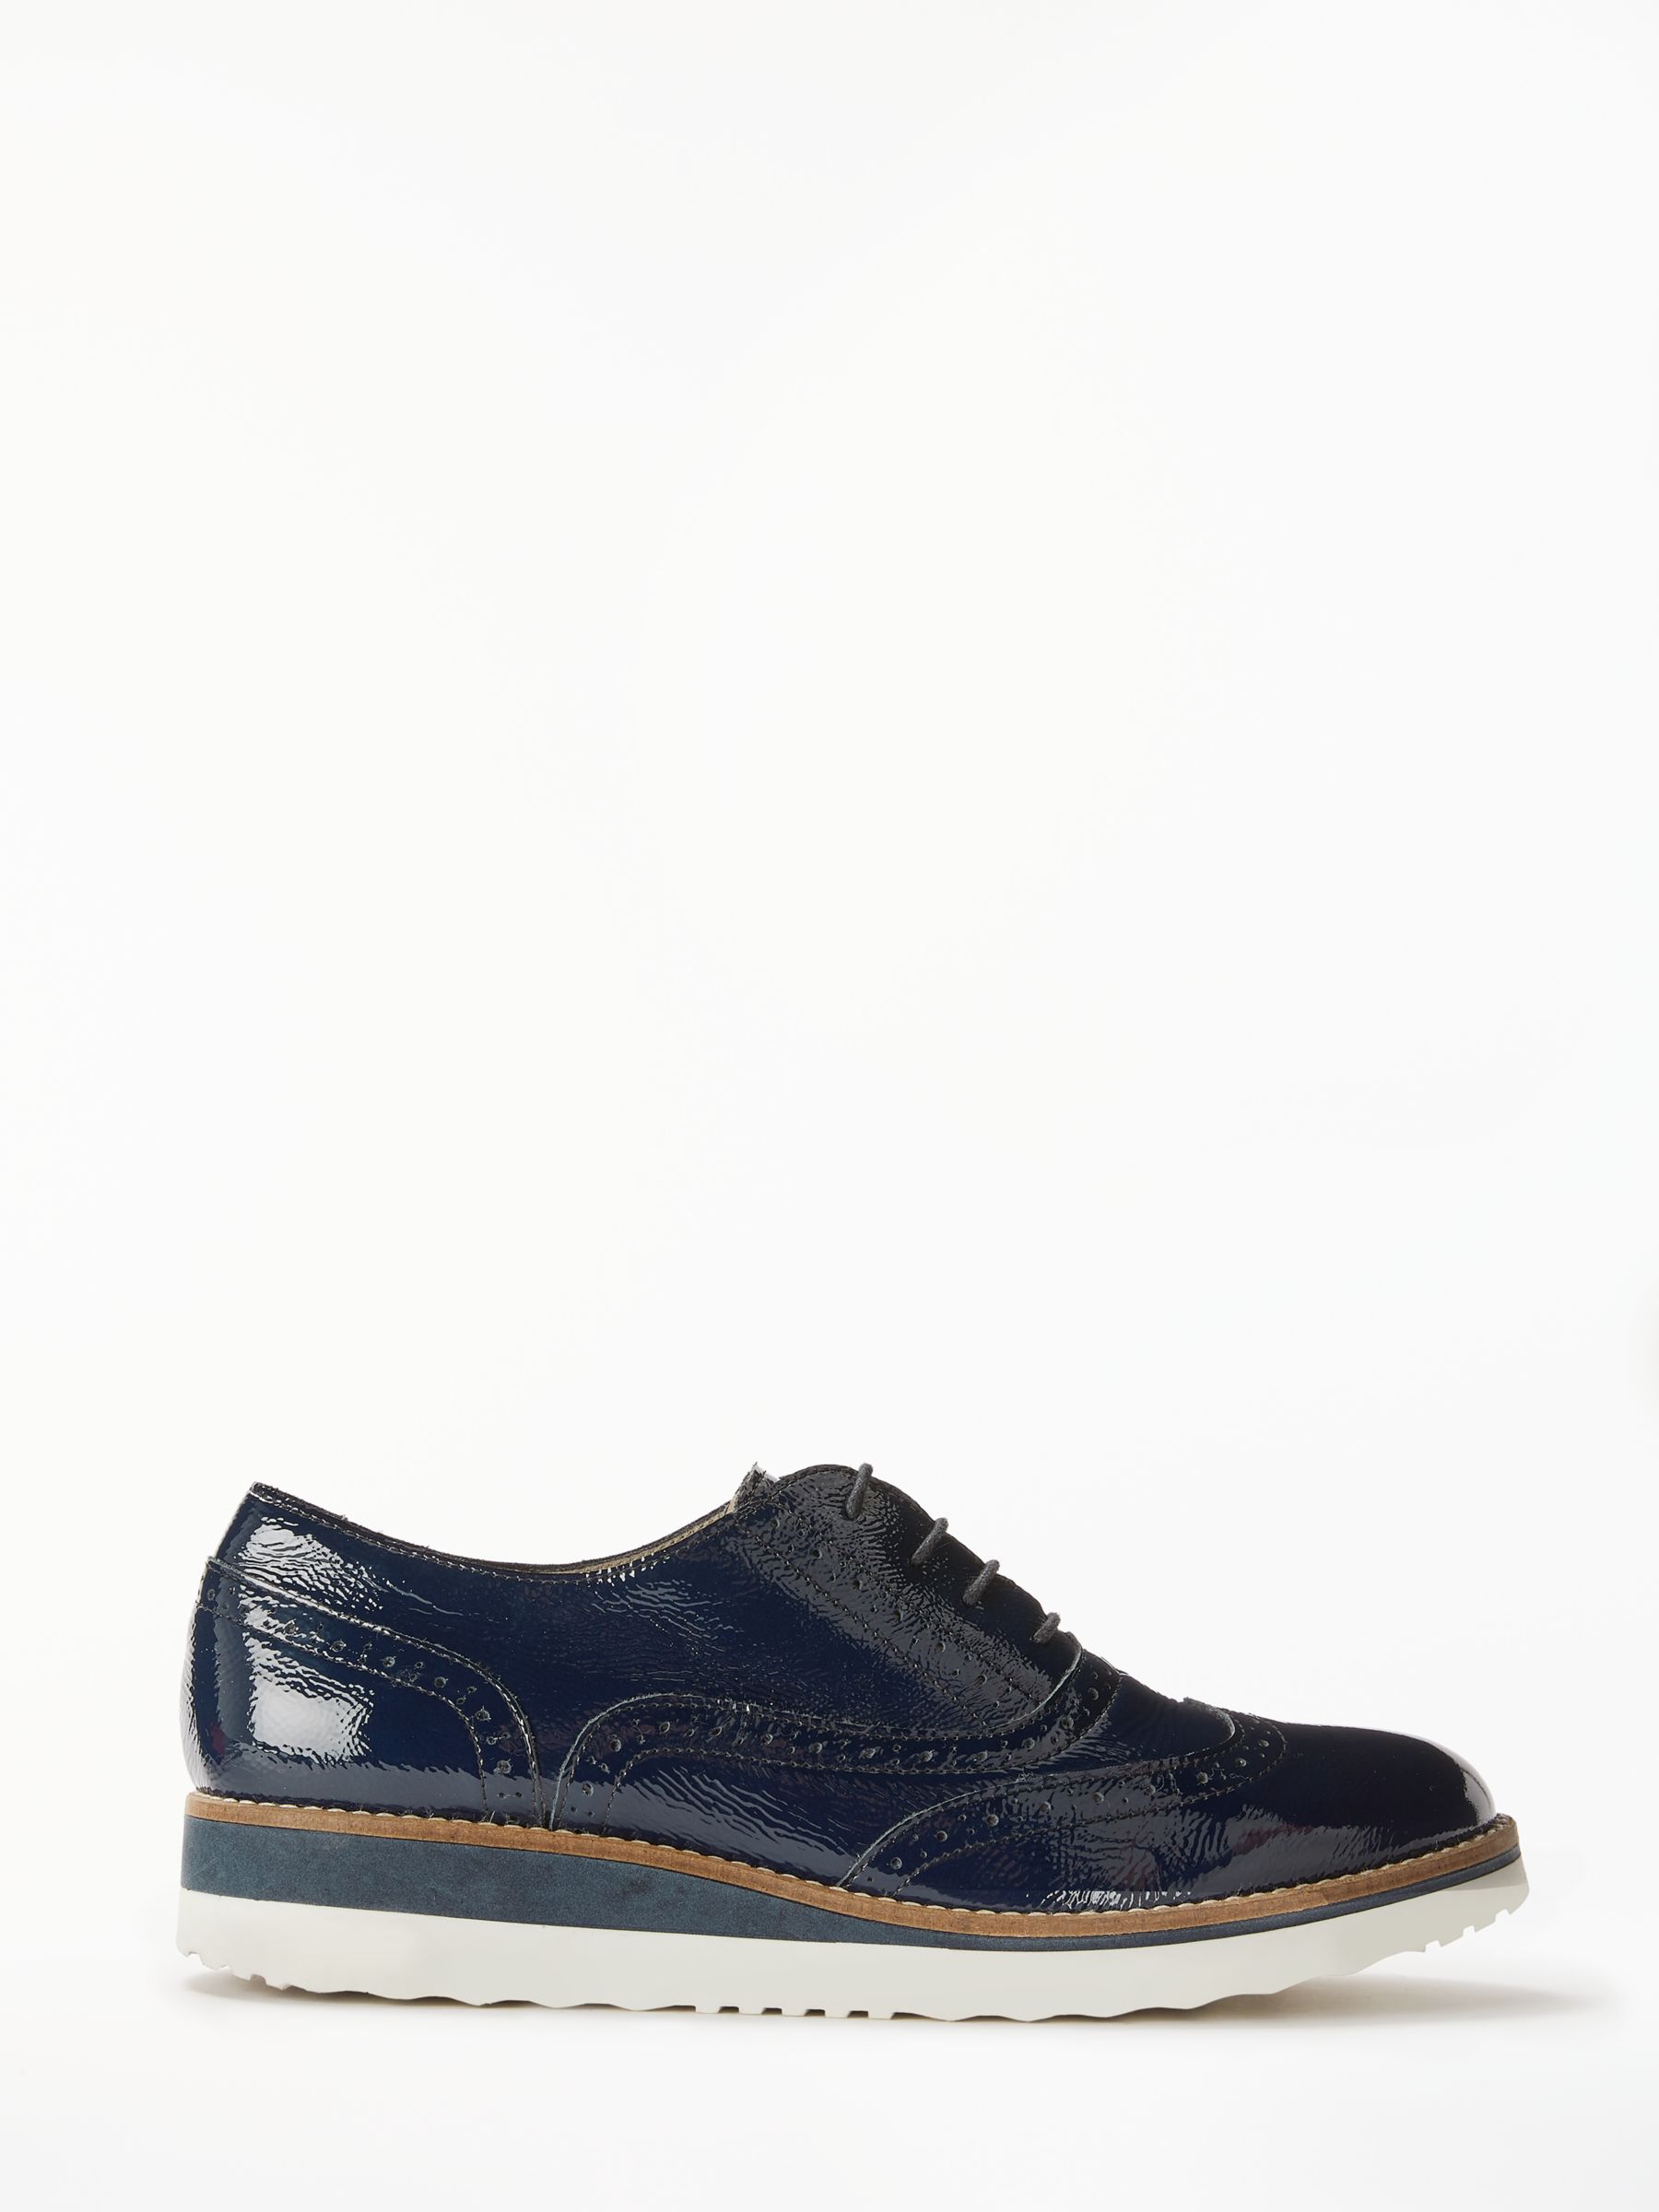 womens navy patent shoes